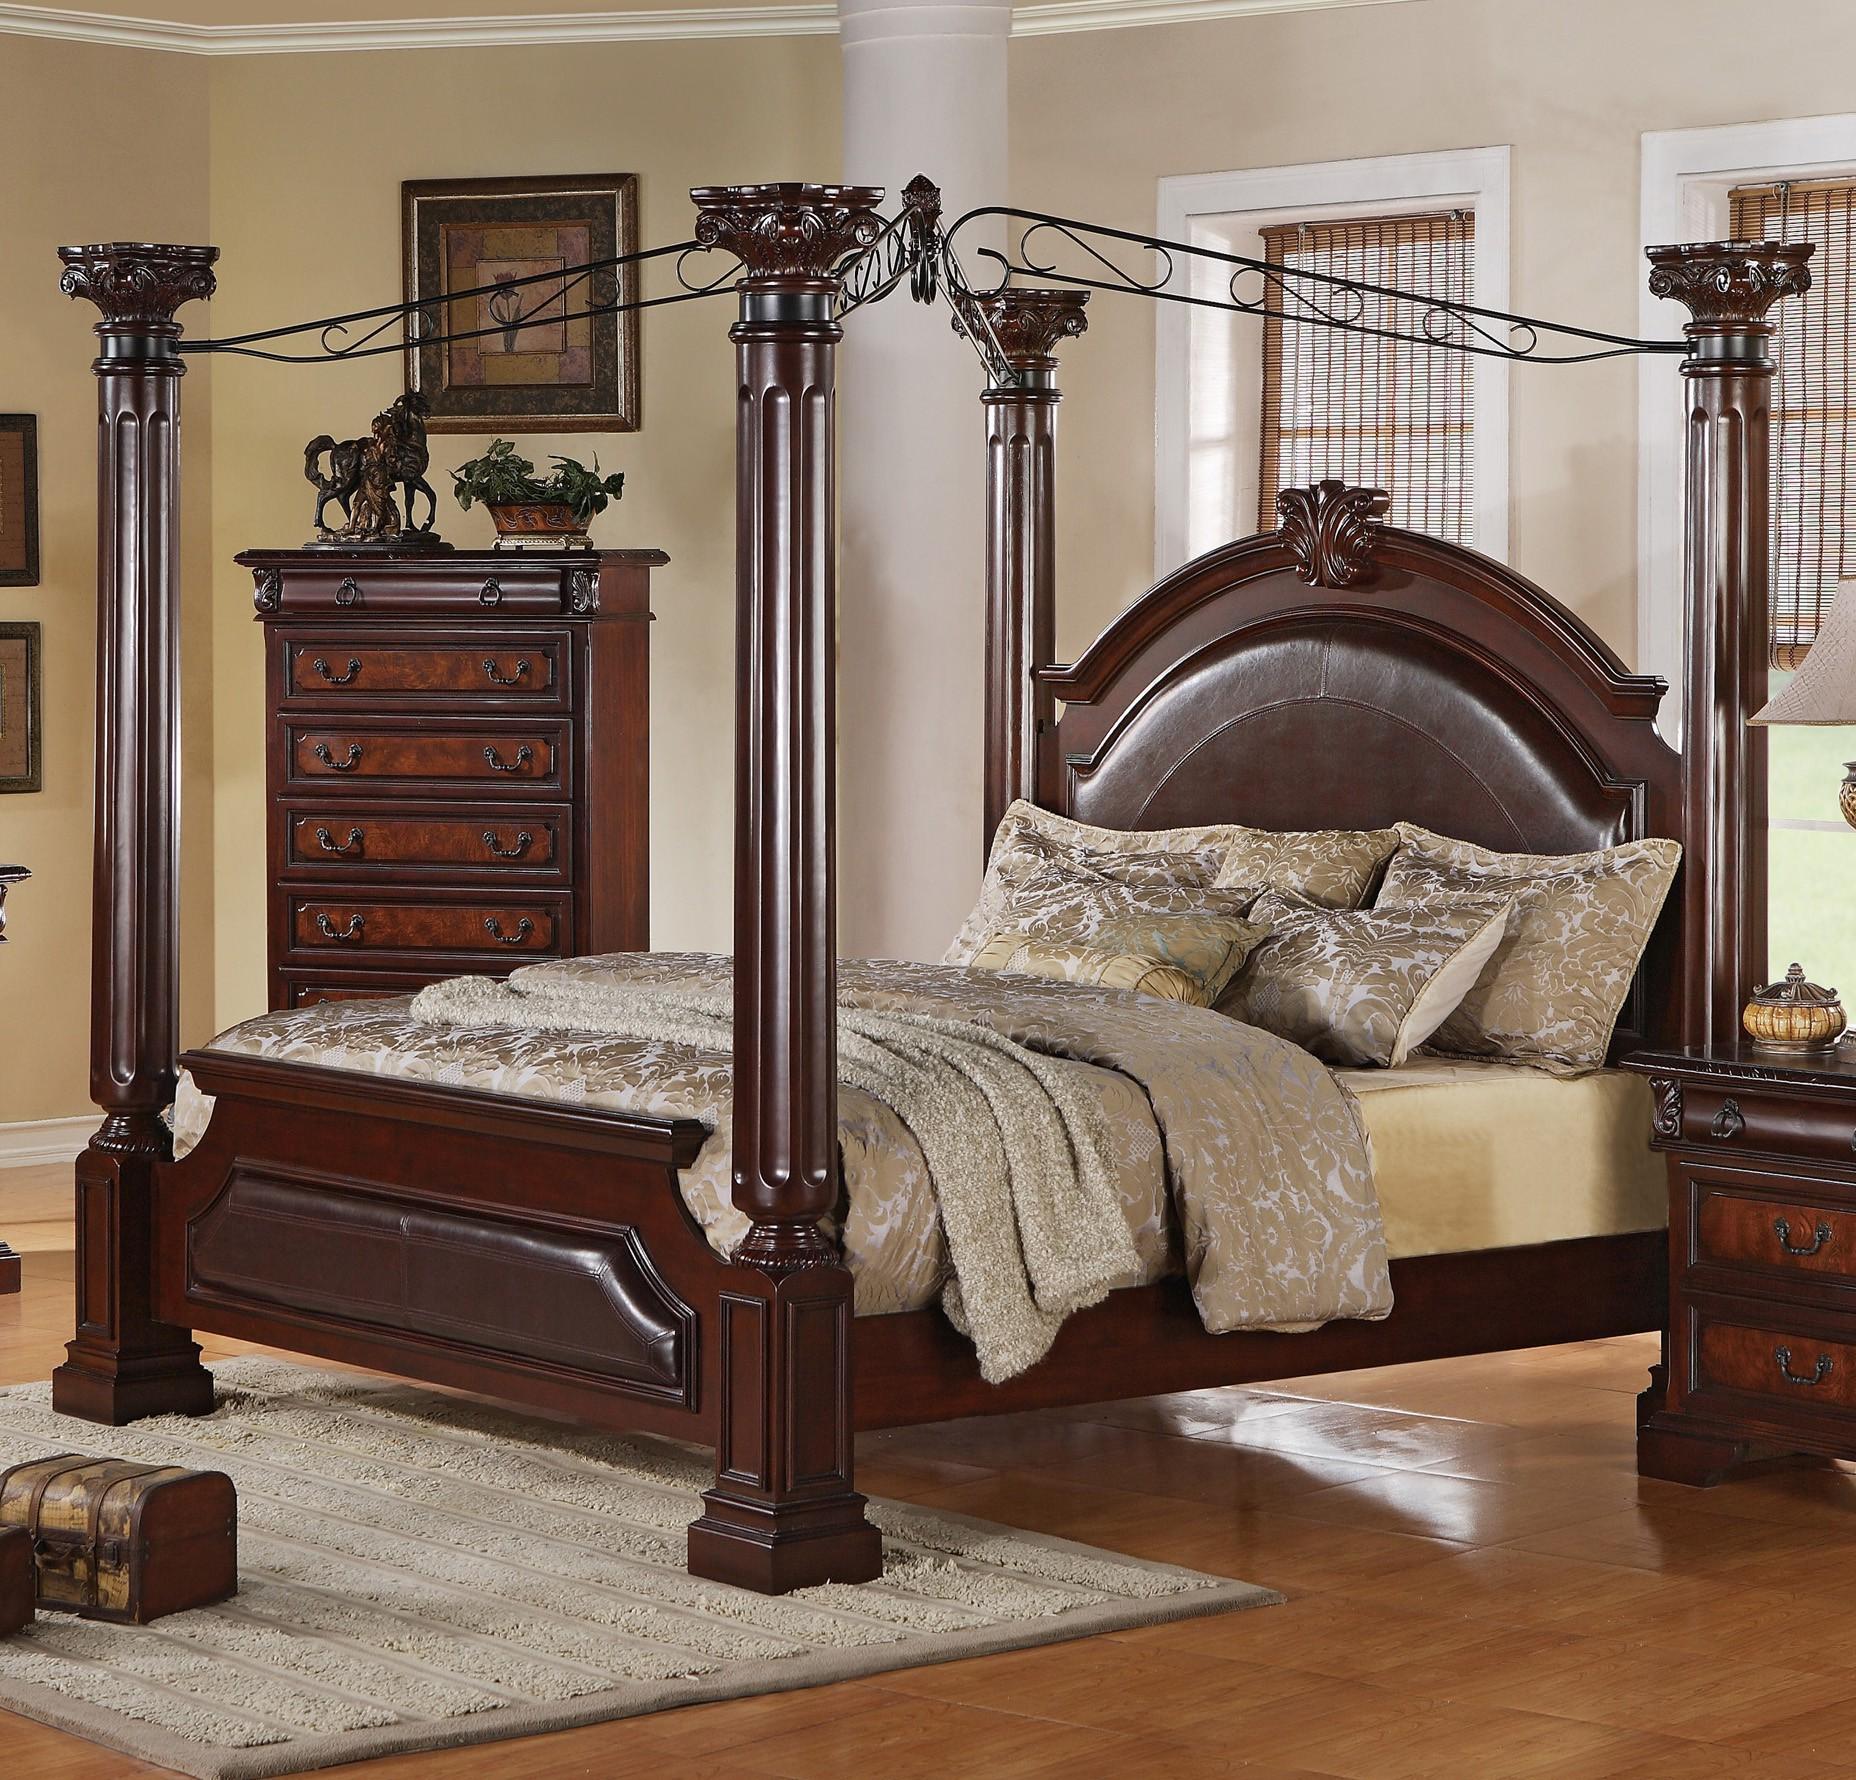 

    
Neo Renaissance B1470-Q Canopy Bedroom Set in 6 Pieces by Crown Mark
